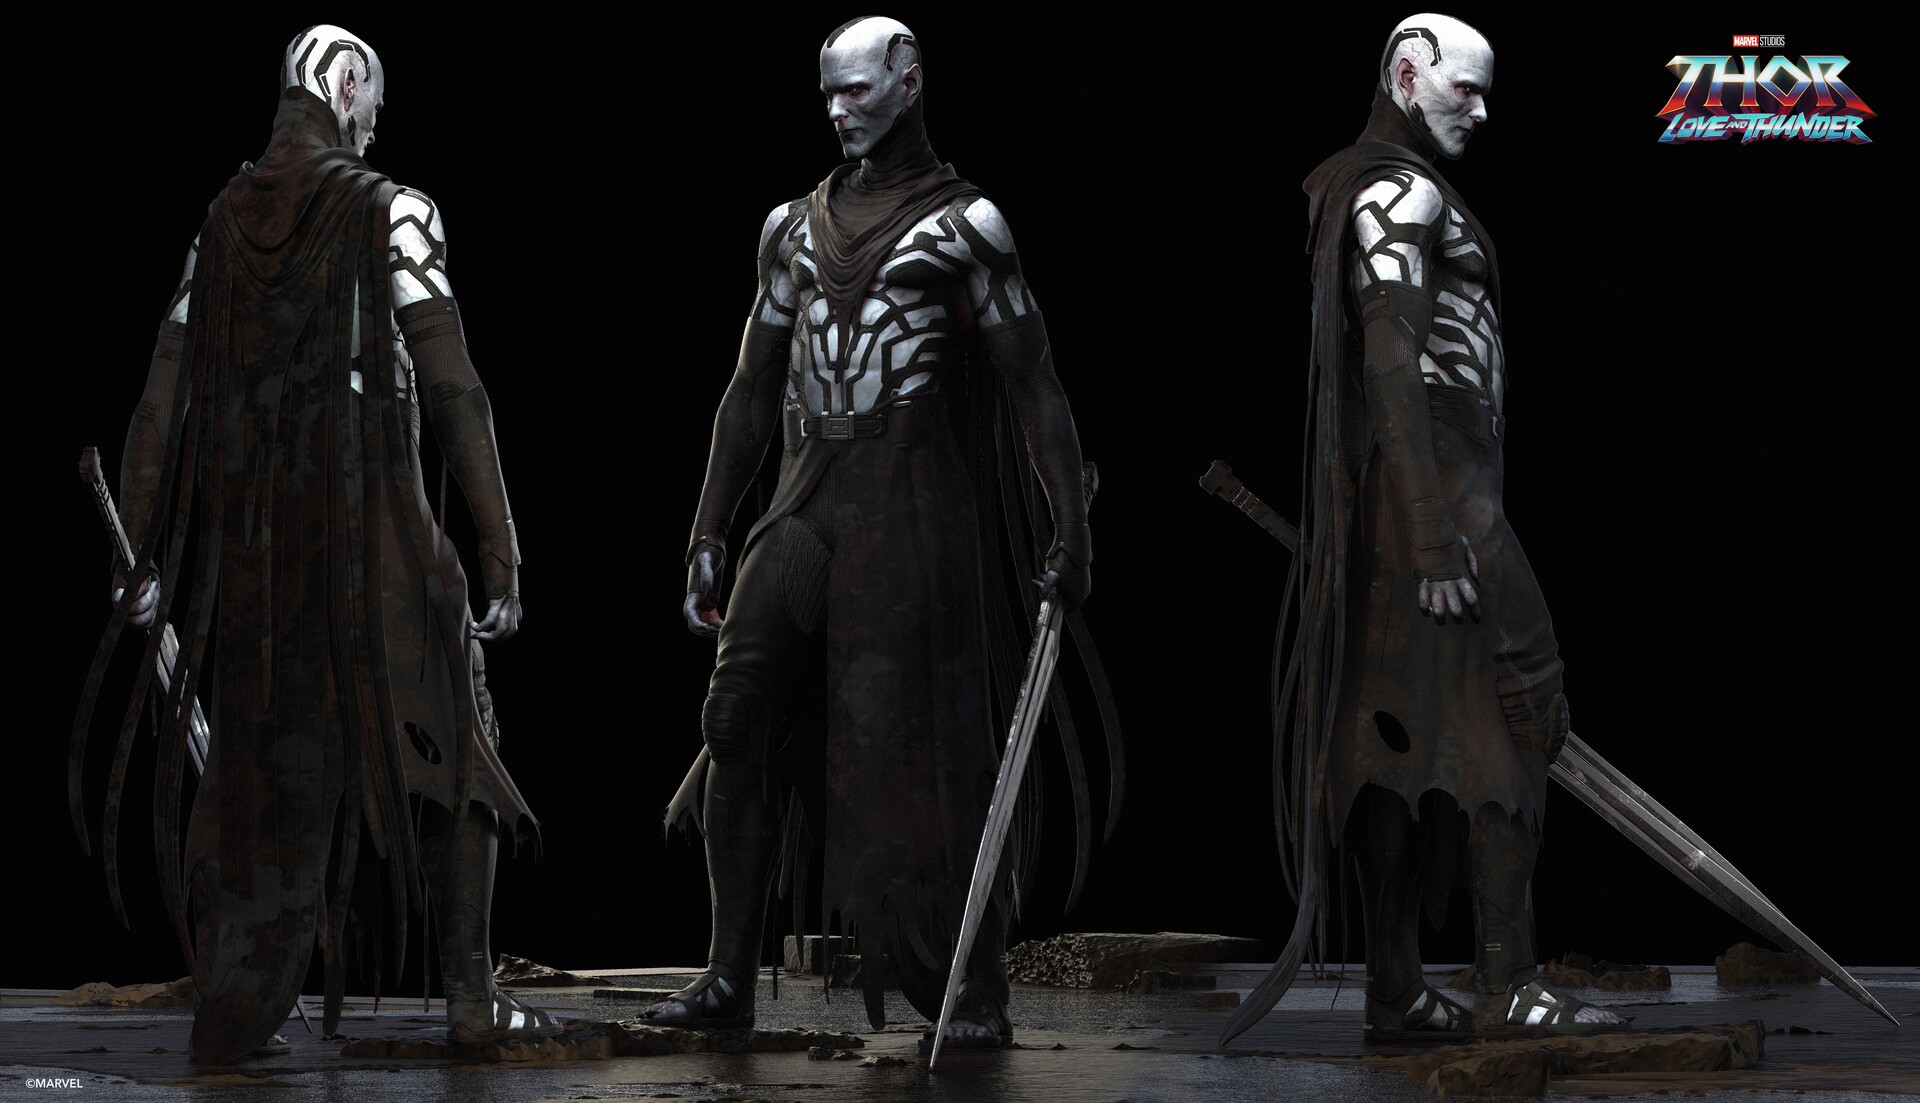 More Concept art for Thor: Love and Thunder #gorr character design